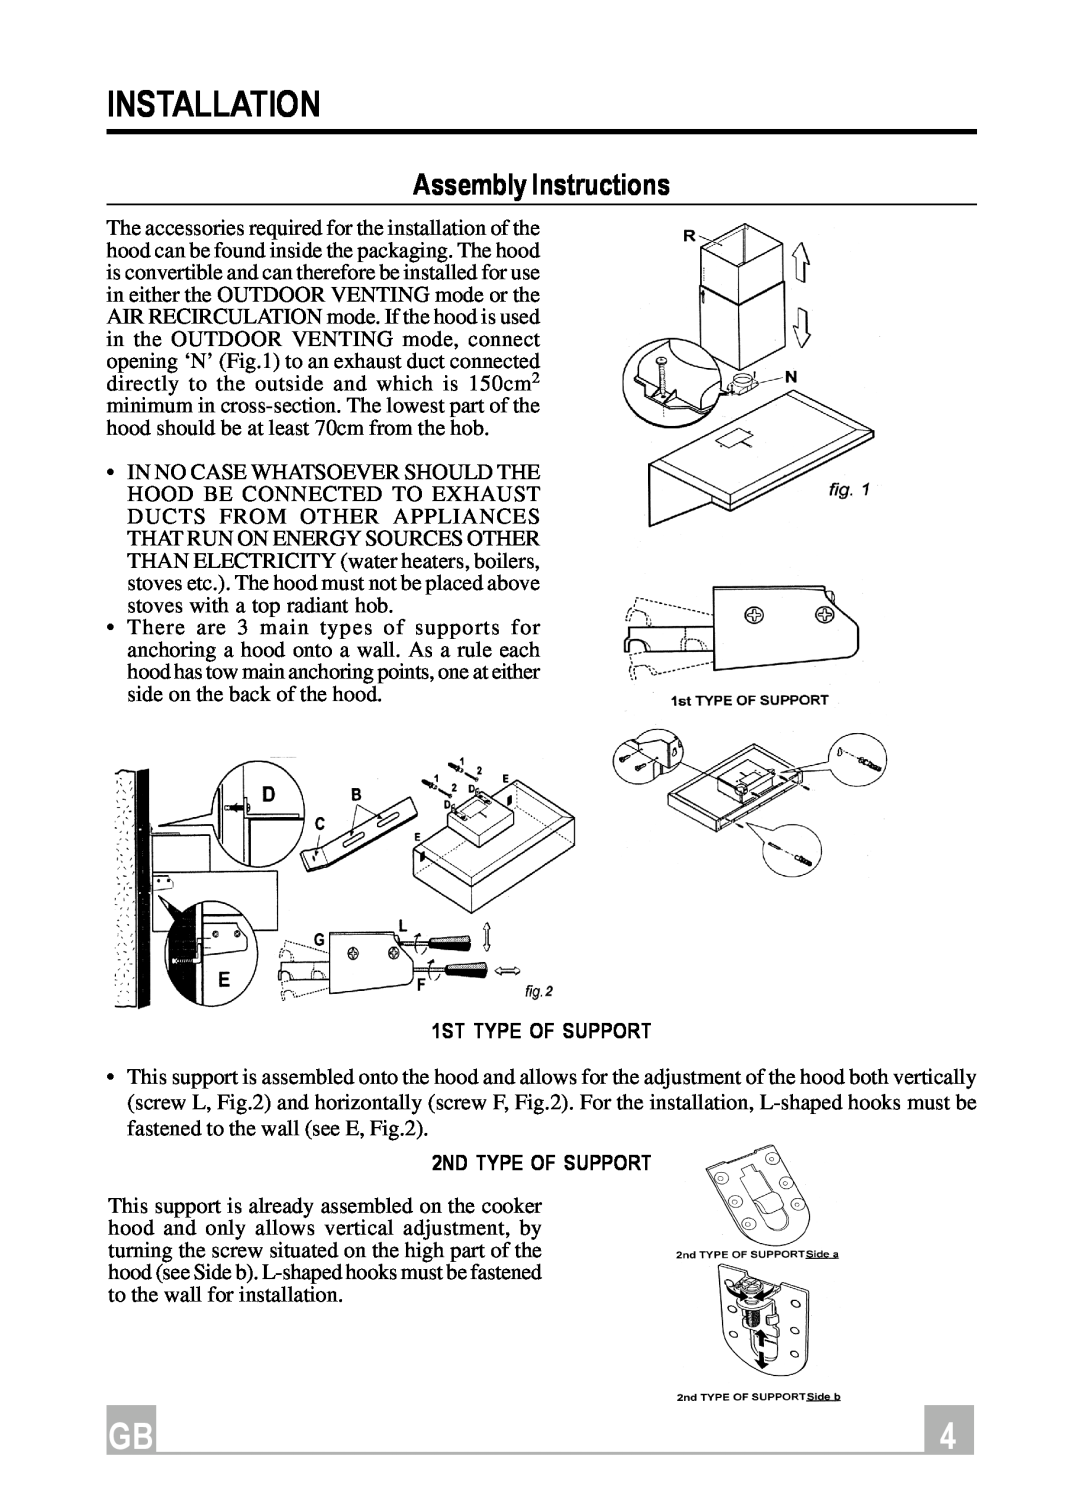 Hotpoint HX901X manual Installation, Assembly Instructions, 1ST TYPE OF SUPPORT, 2ND TYPE OF SUPPORT 